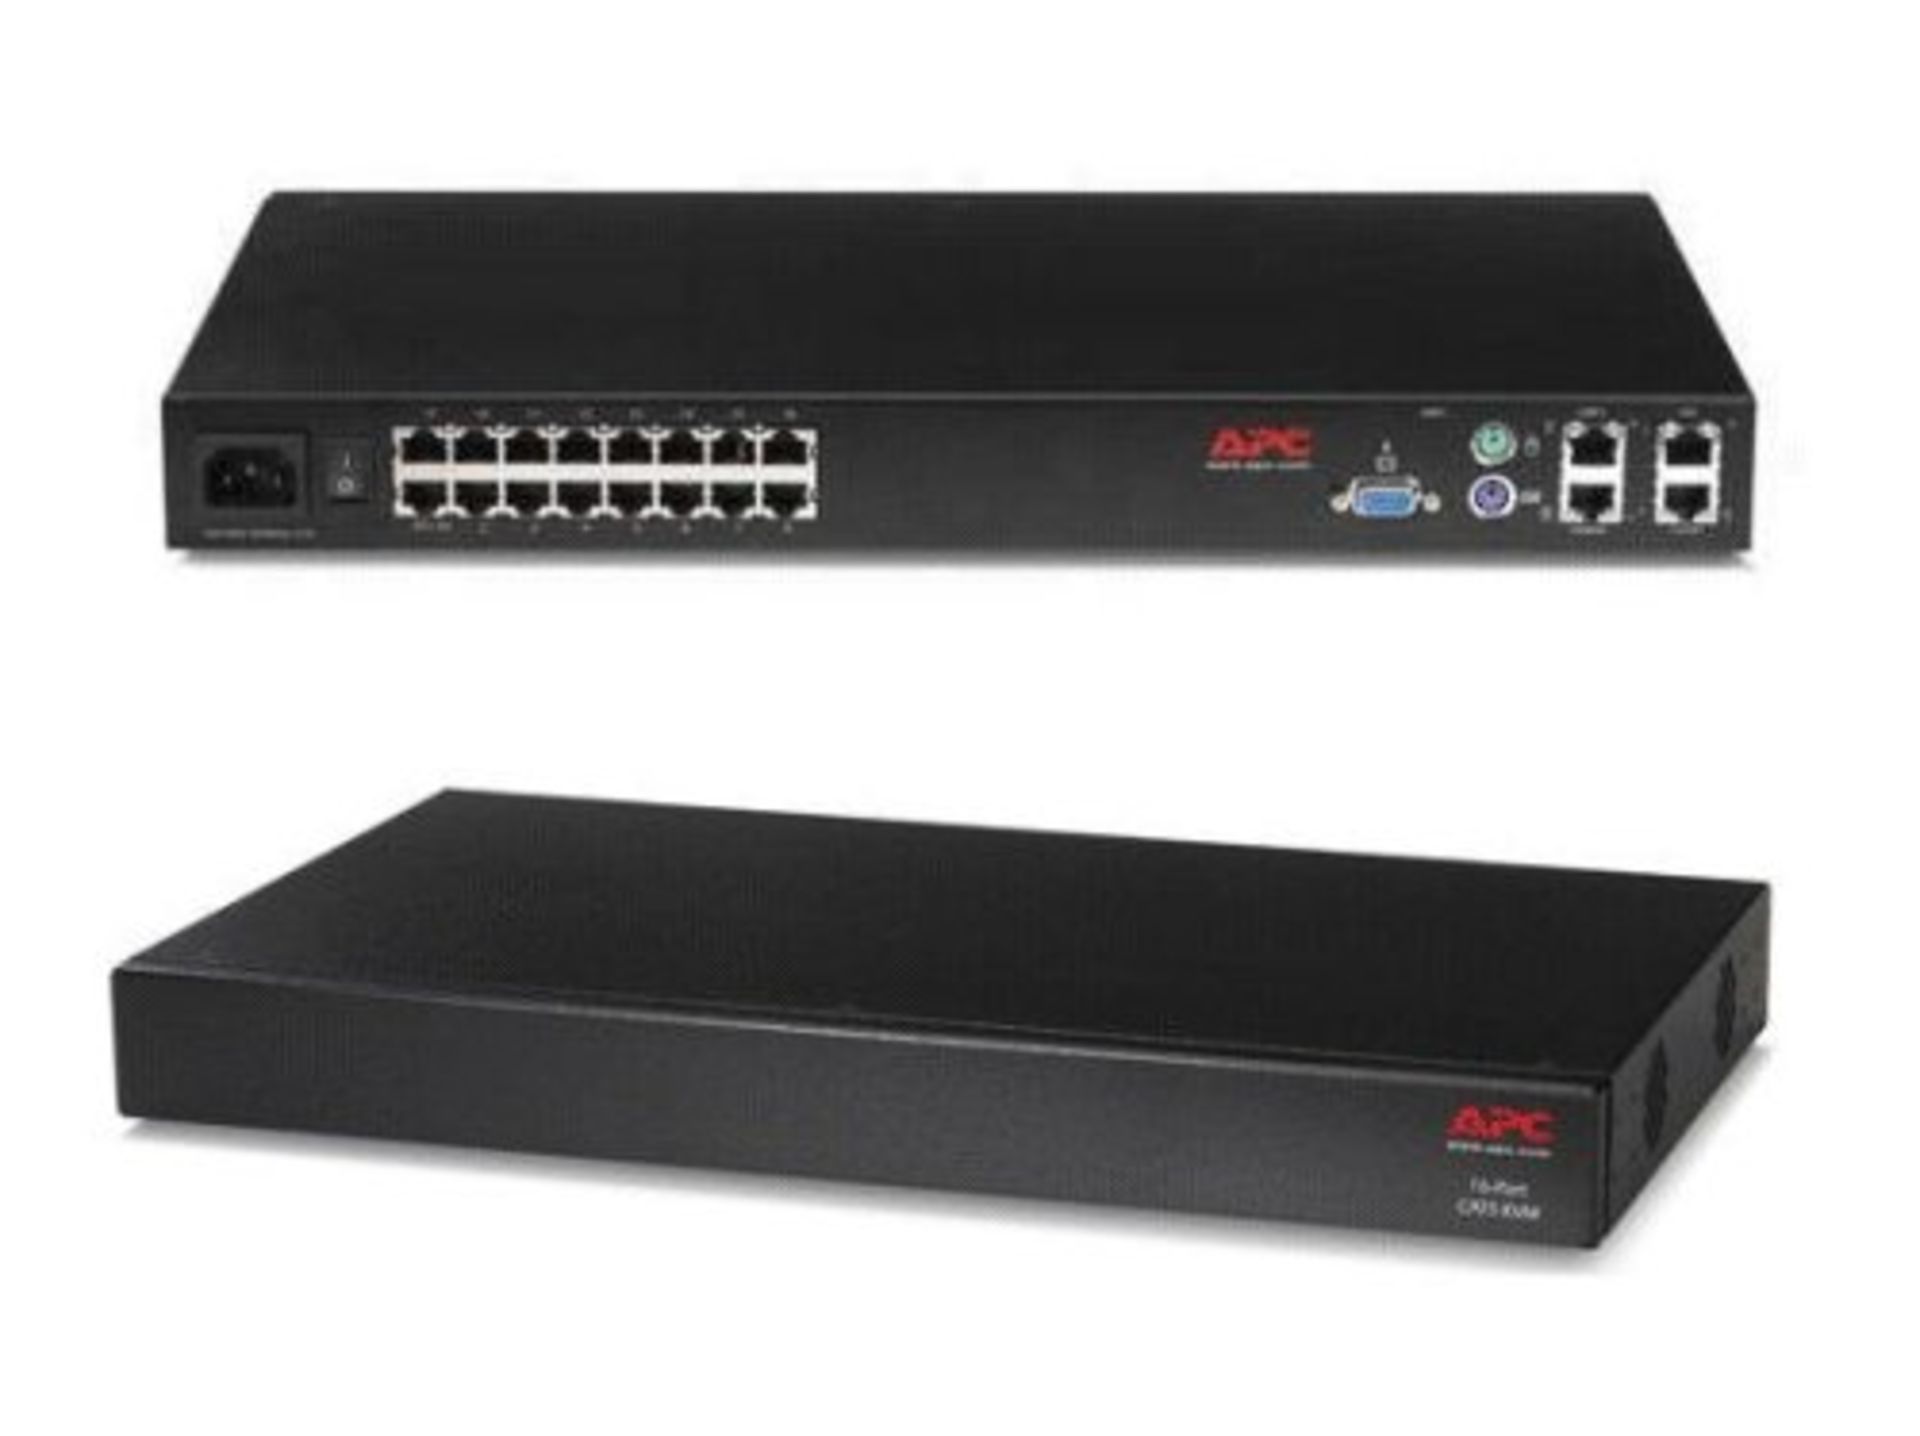 1 x APC 16-Port IP KVM - Recently Taken From A Working Office Environment - Ref NSB009 - CL106 -